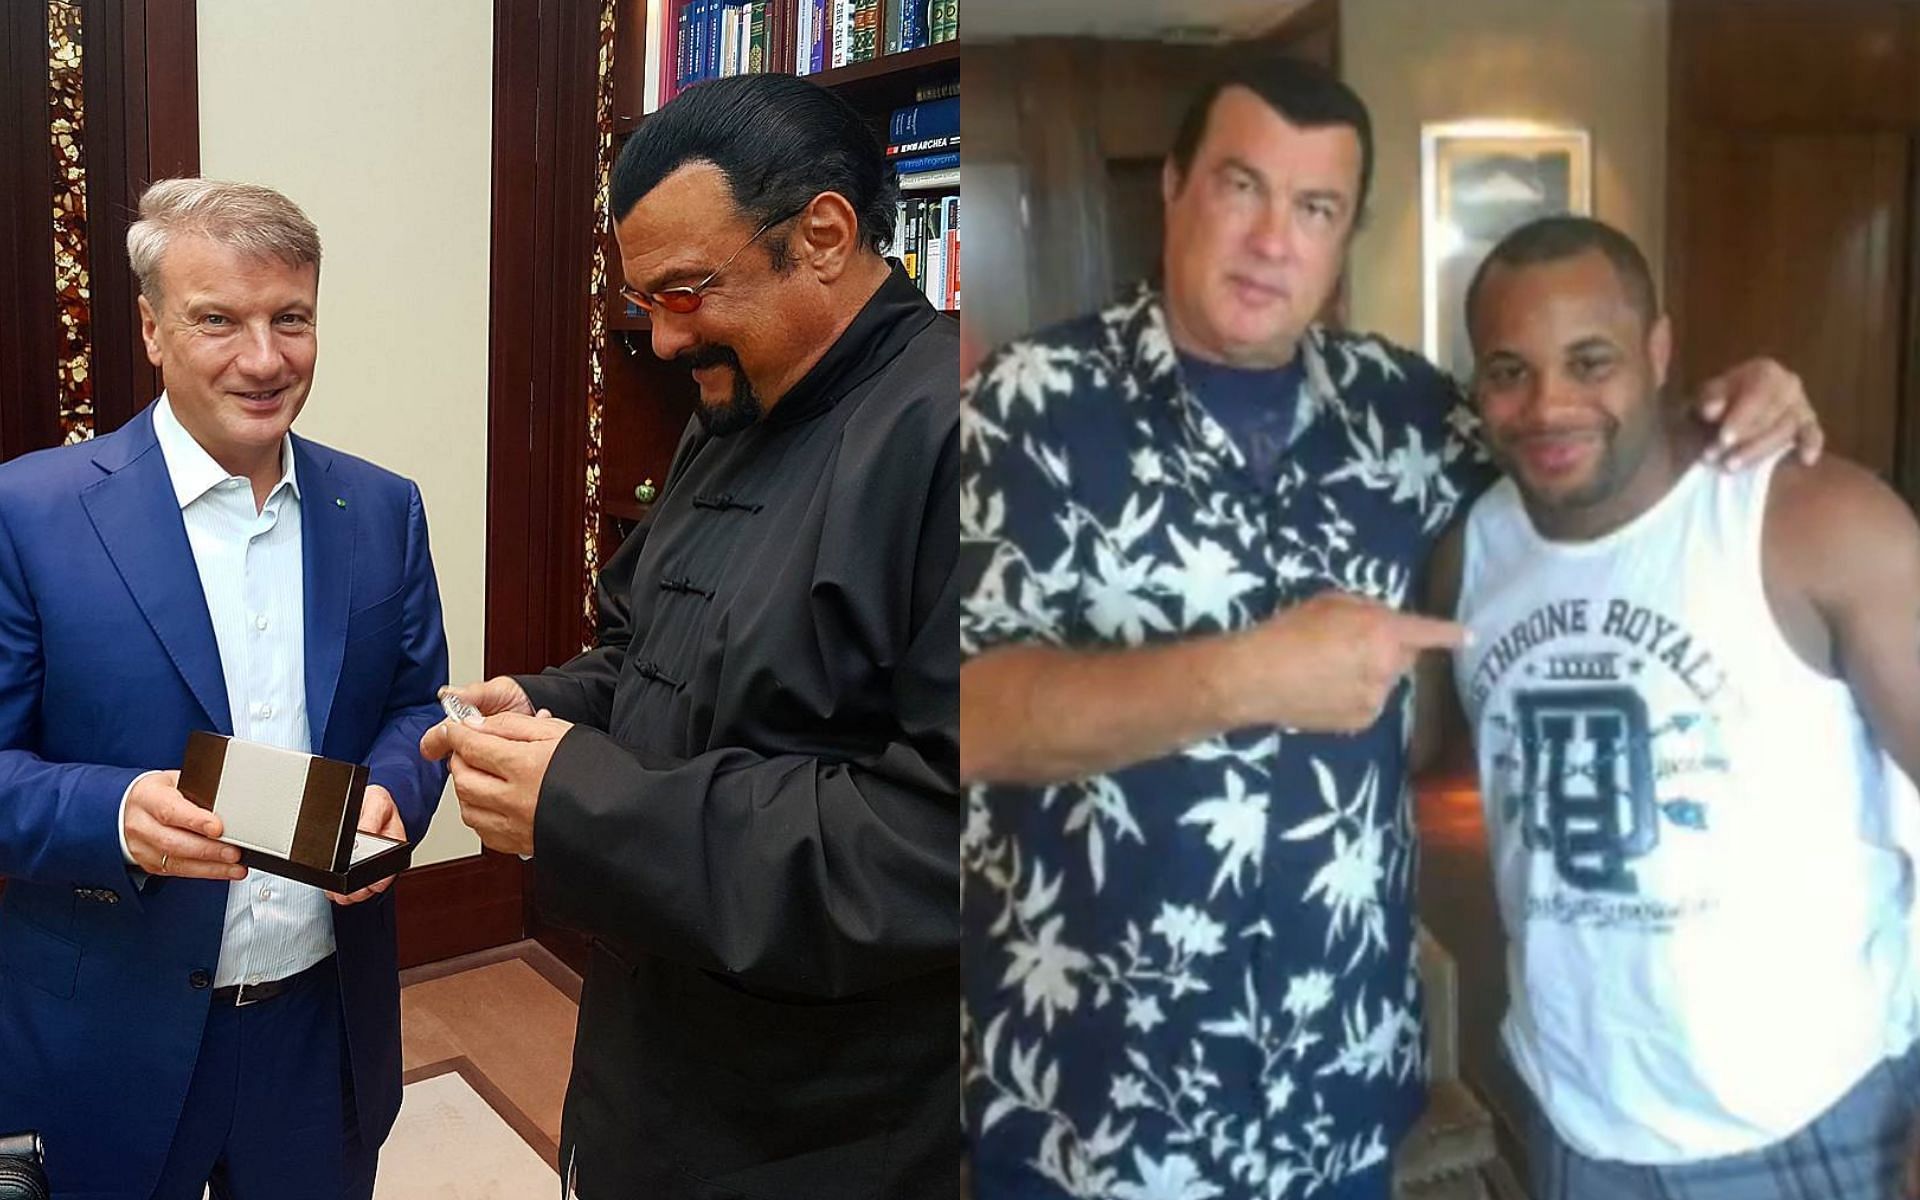 Steven Seagal and Herman Gref (left) Steven Seagal and Daniel Cormier (right) [Image courtesy @seagalofficial on Instagram @thehornpodcast on Twitter